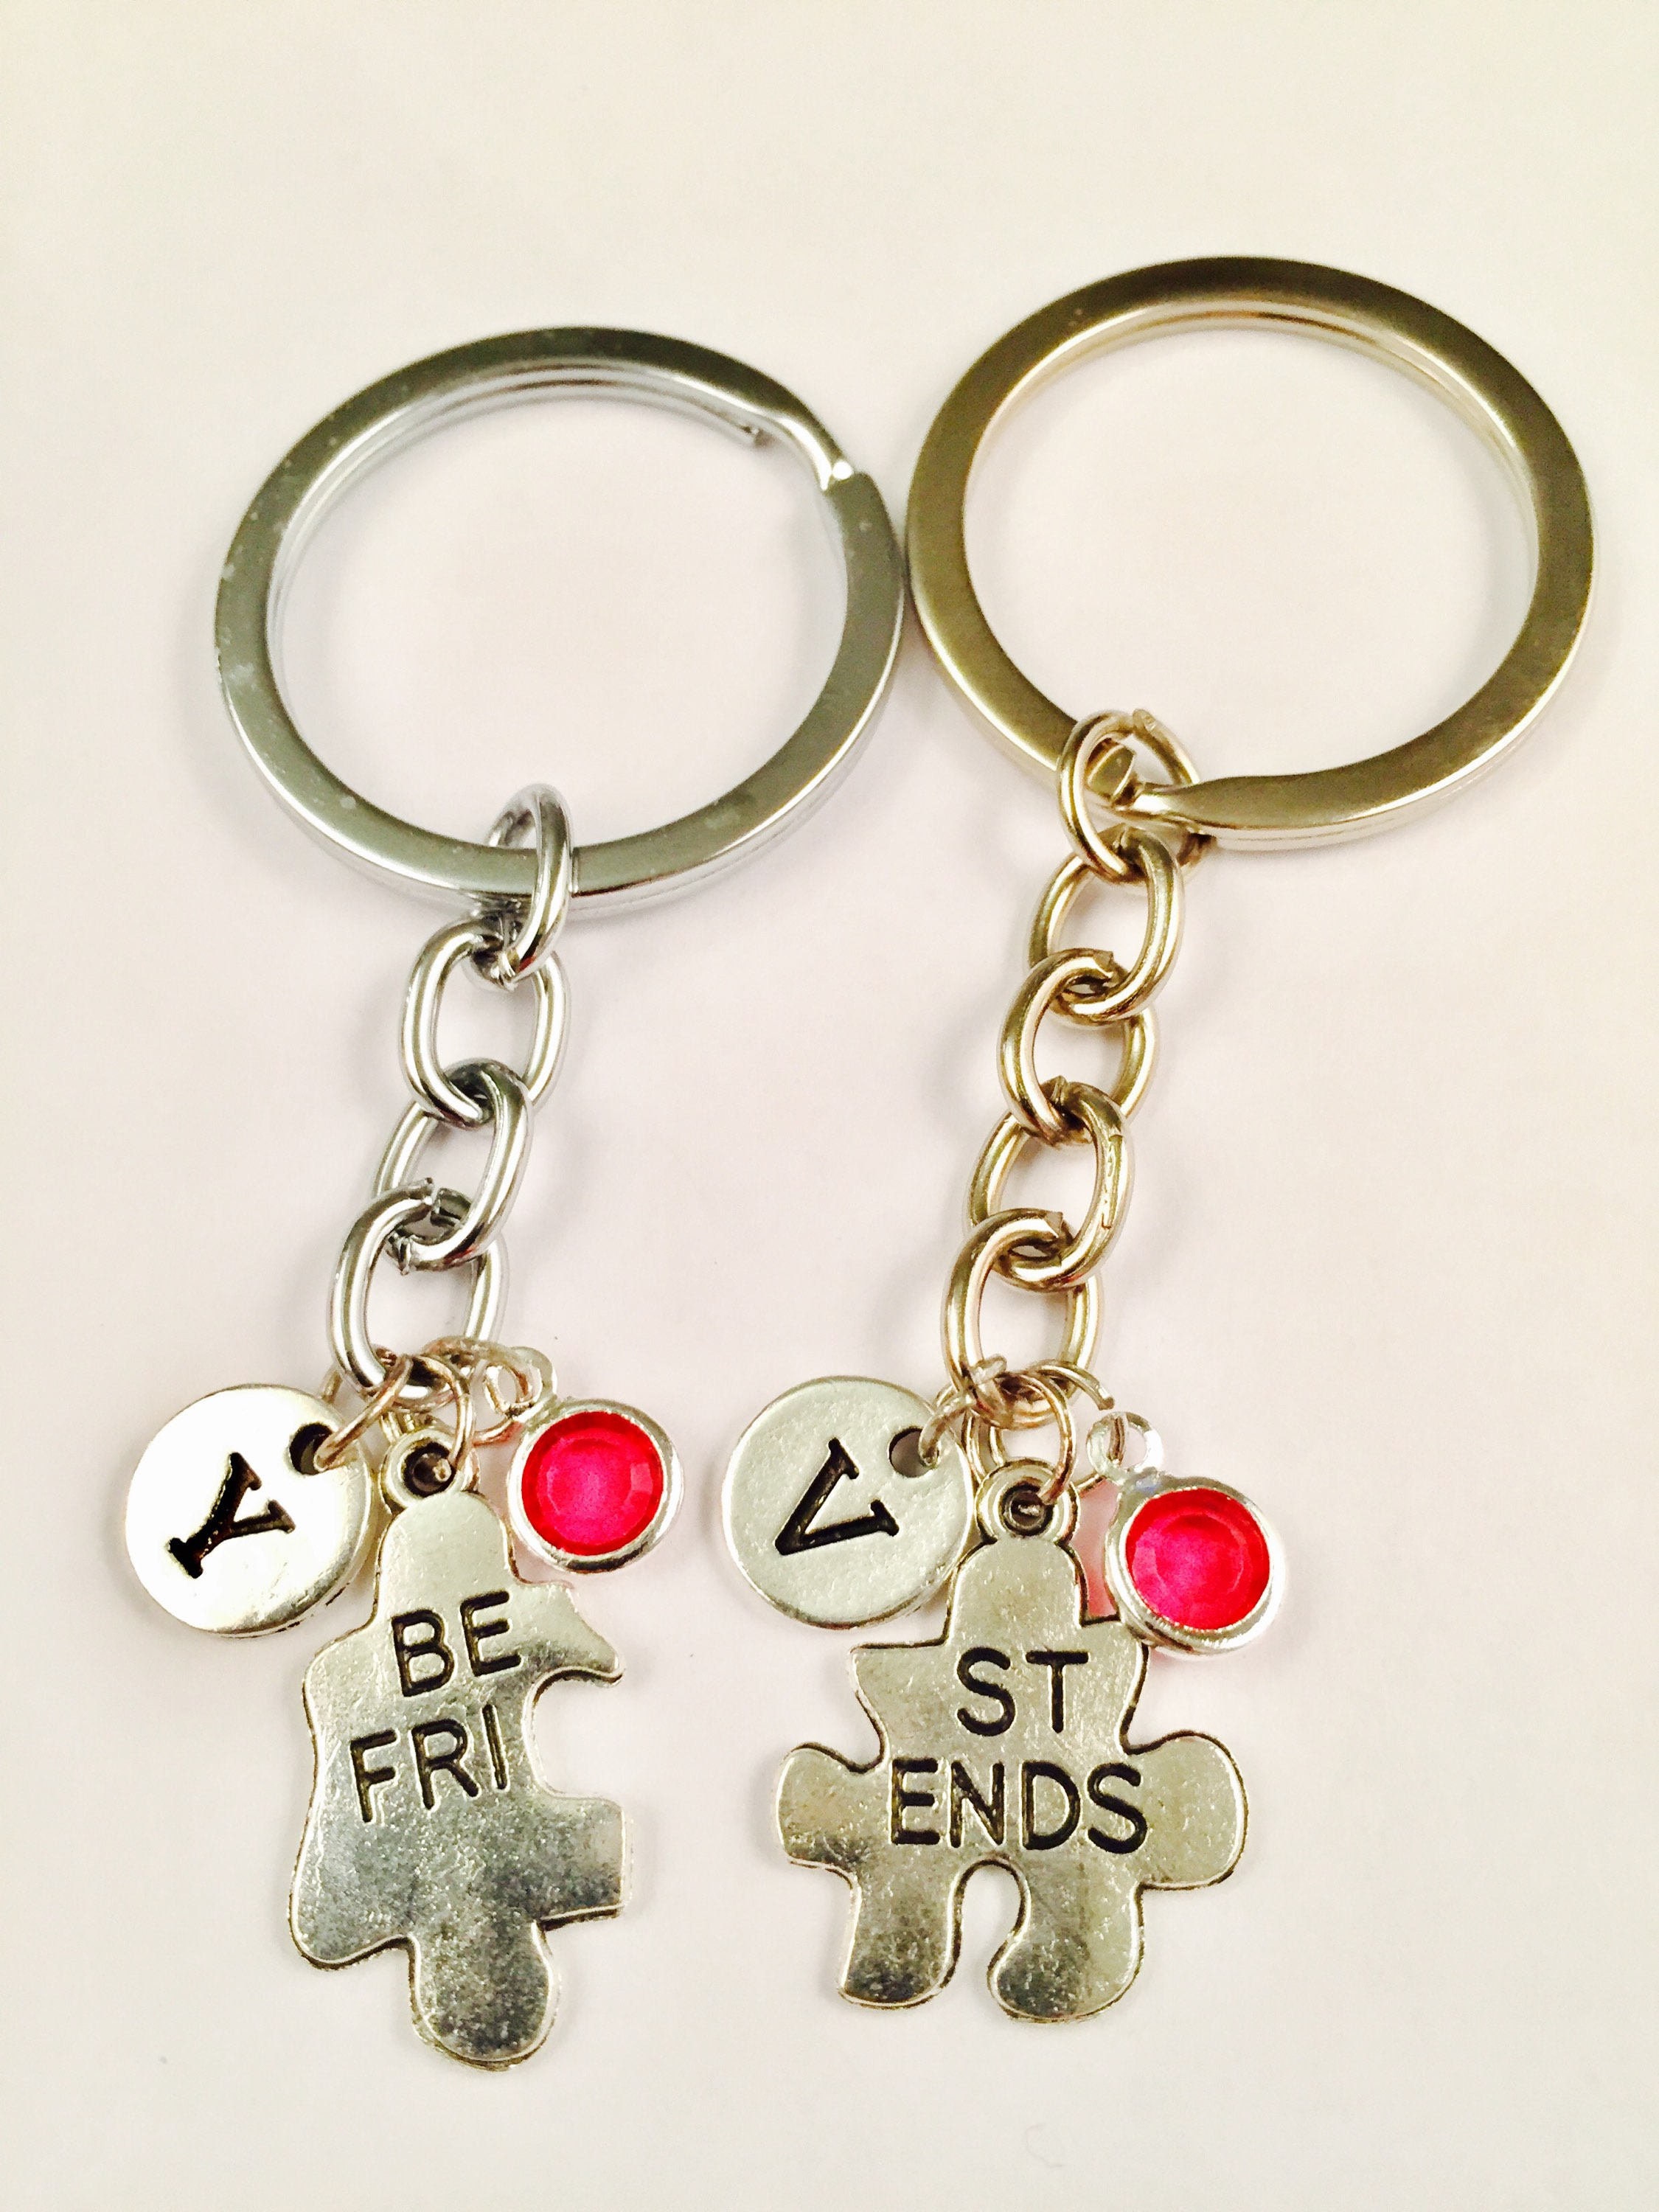 2 Best friends puzzle keychains matching puzzle keyring set great gift idea 